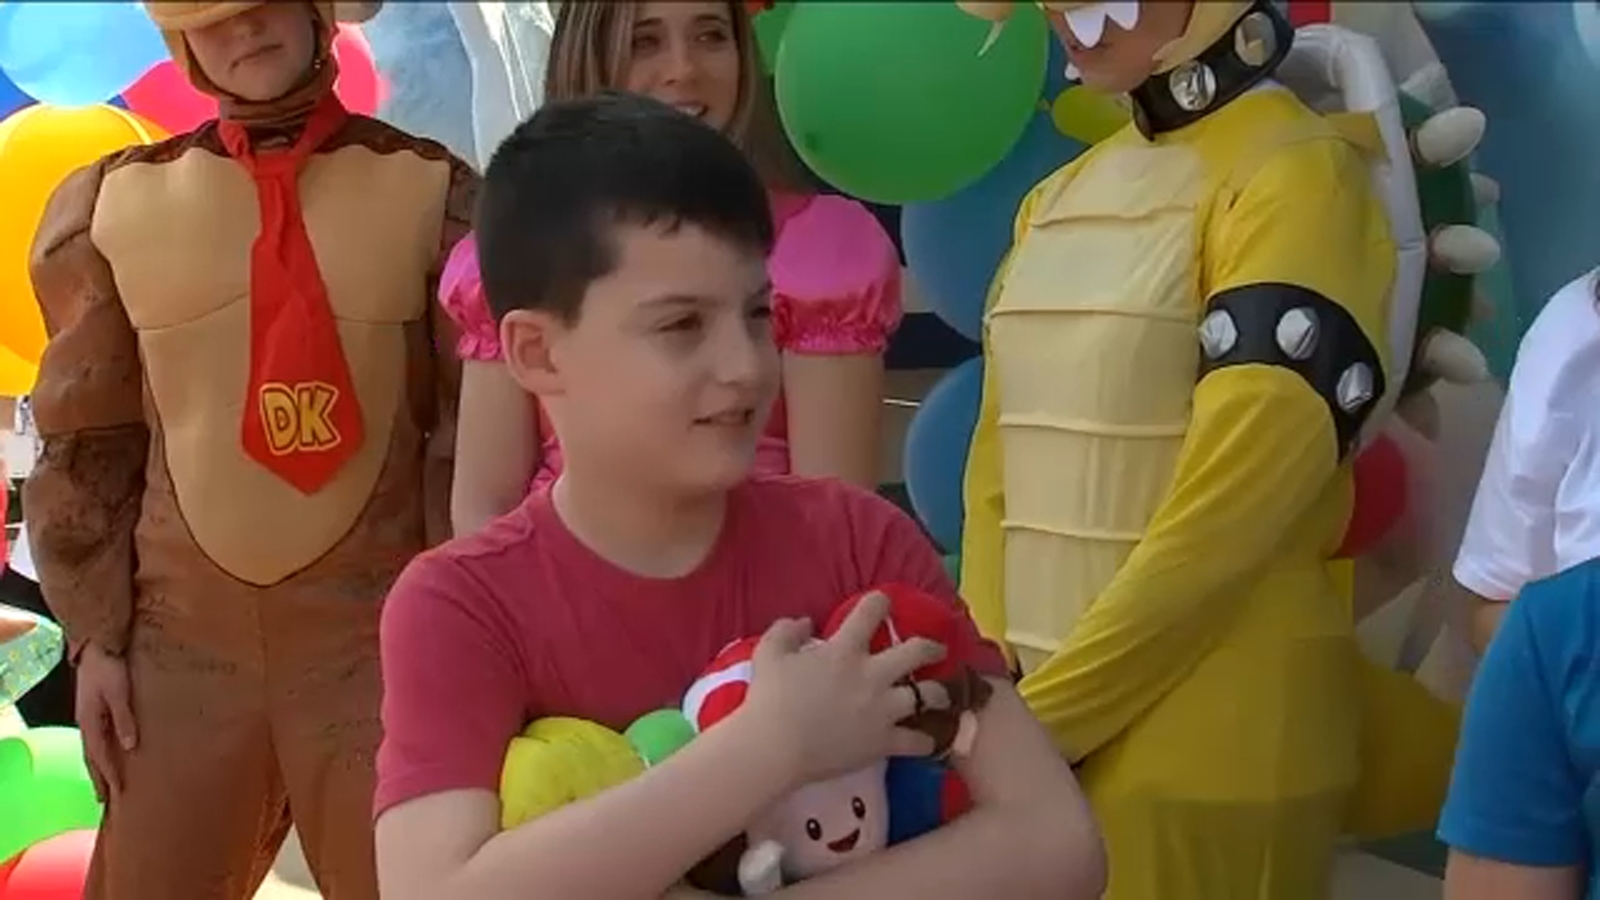 Make-A-Wish Foundation: Morganville, NJ boy battling life-threatening condition surprised with trip to Super Nintendo World [Video]